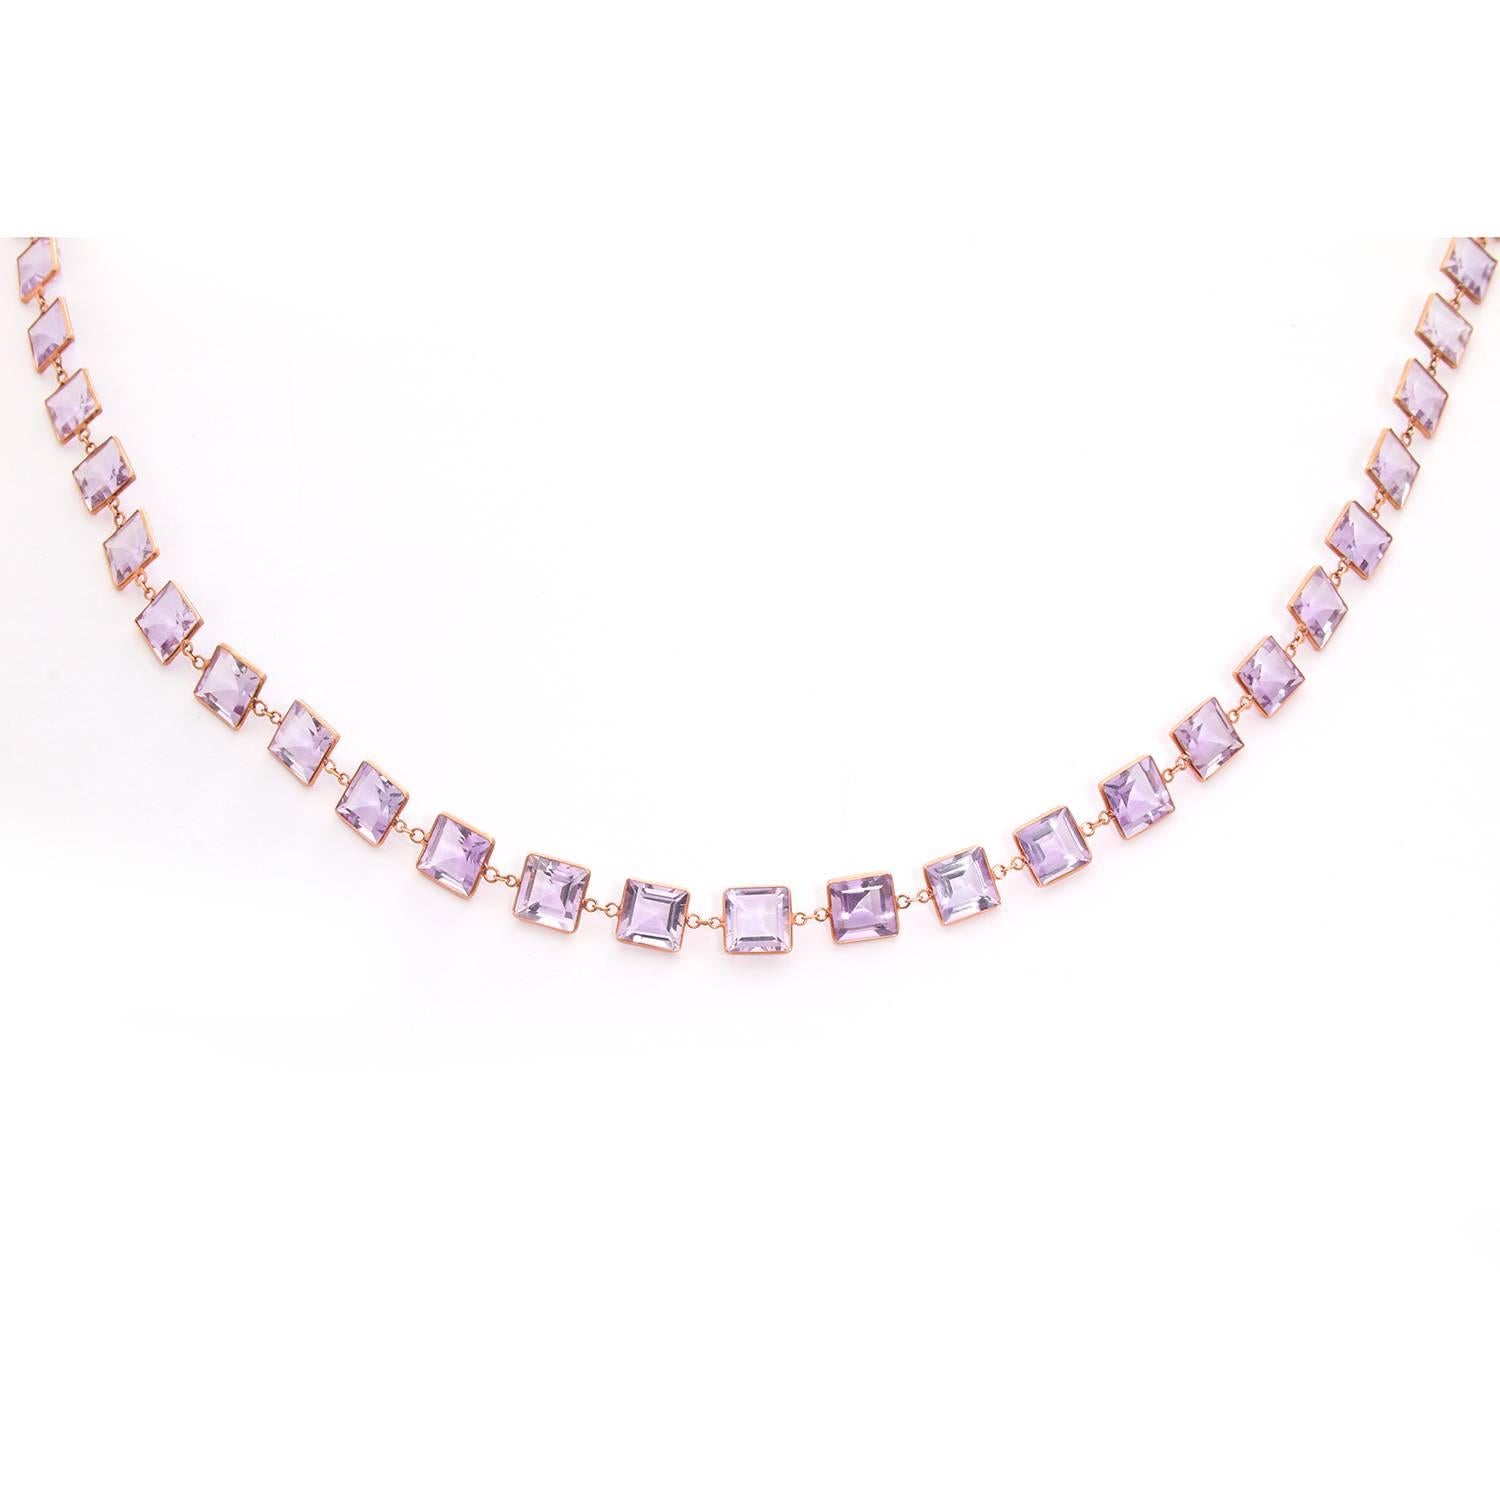 Women's Chic 14 Karat Rose Gold Pink Amethyst by the Yard Necklace